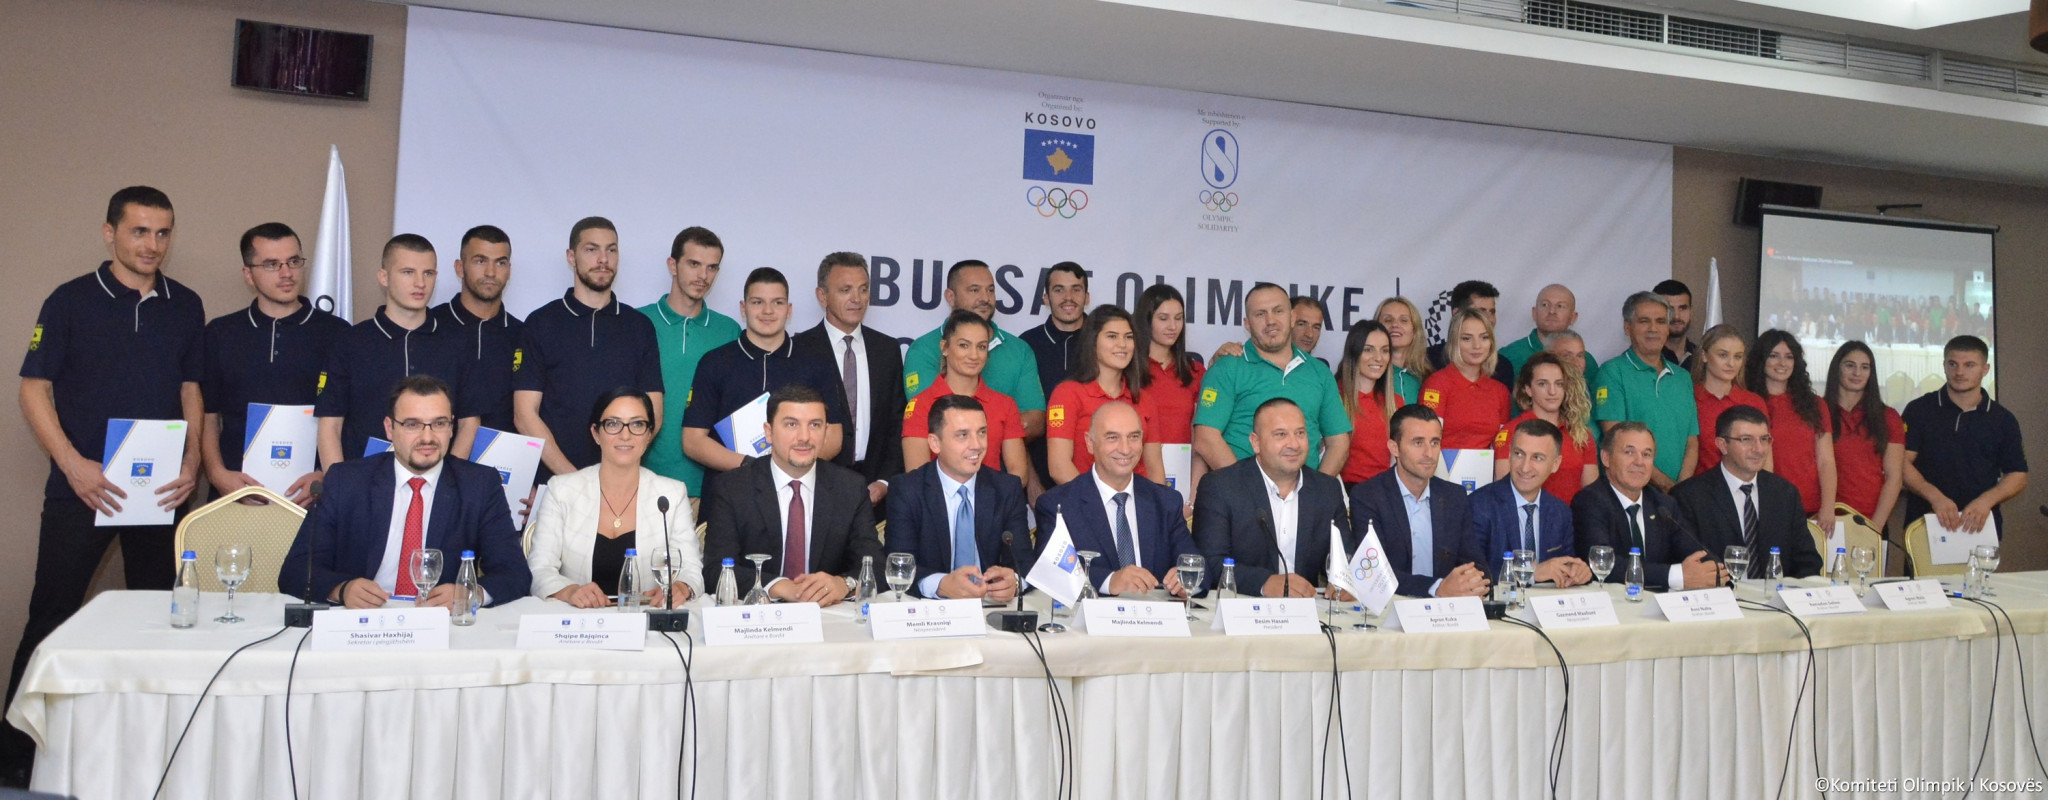 Recipients of Olympic scholarships for Tokyo 2020 and members and staff of Kosovo Olympic Committee ©Kosovo Olympic Committee